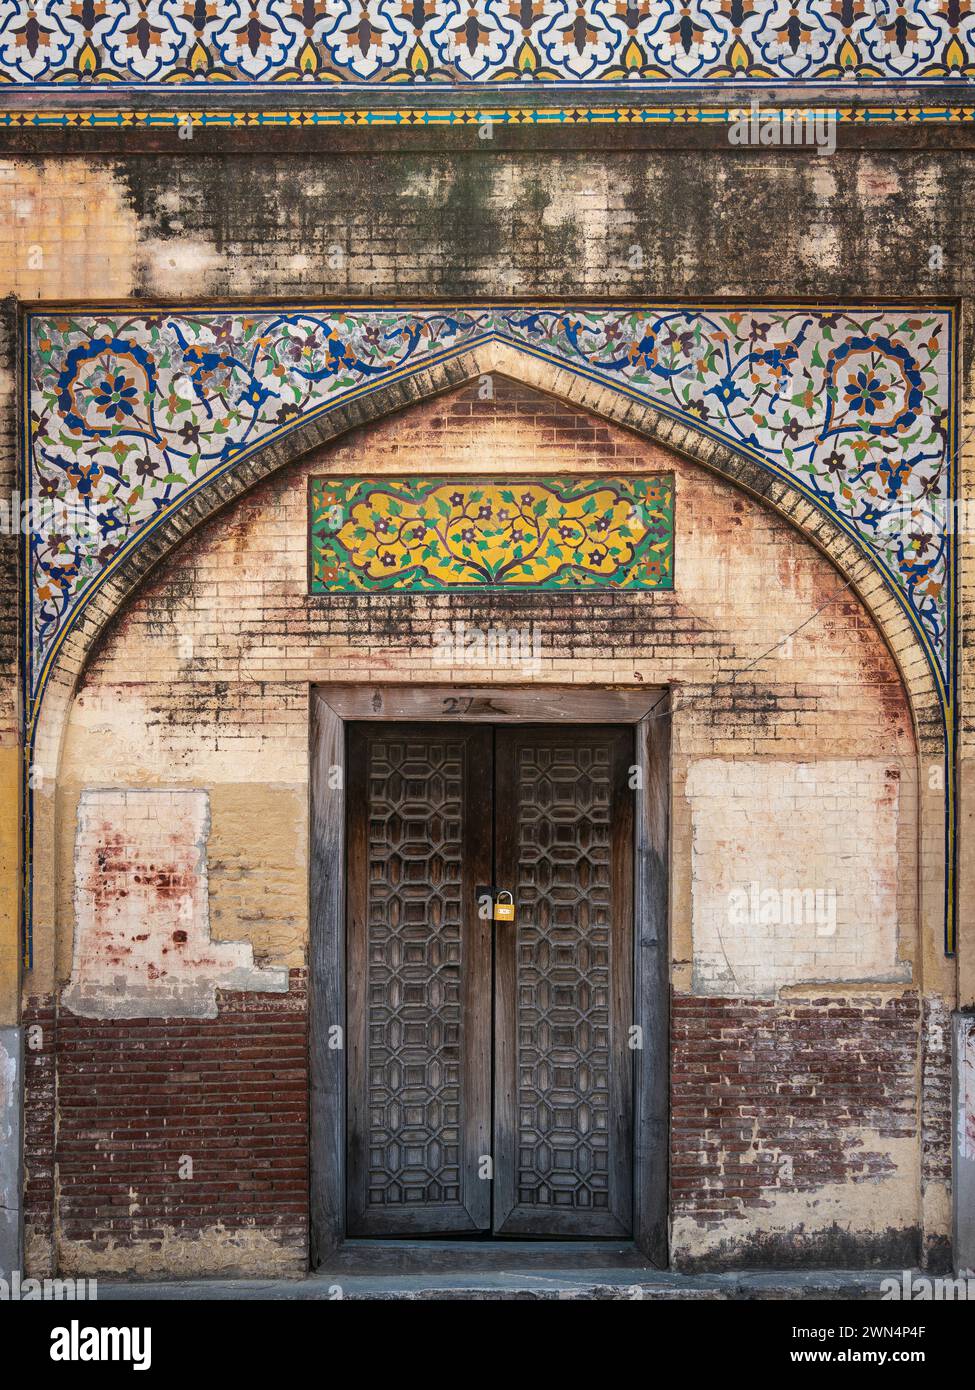 A wooden door at historic landmark Masjid Wazir Khan, a 17th-century Mughal mosque located in the city of Lahore, Punjab, Pakistan. Stock Photo